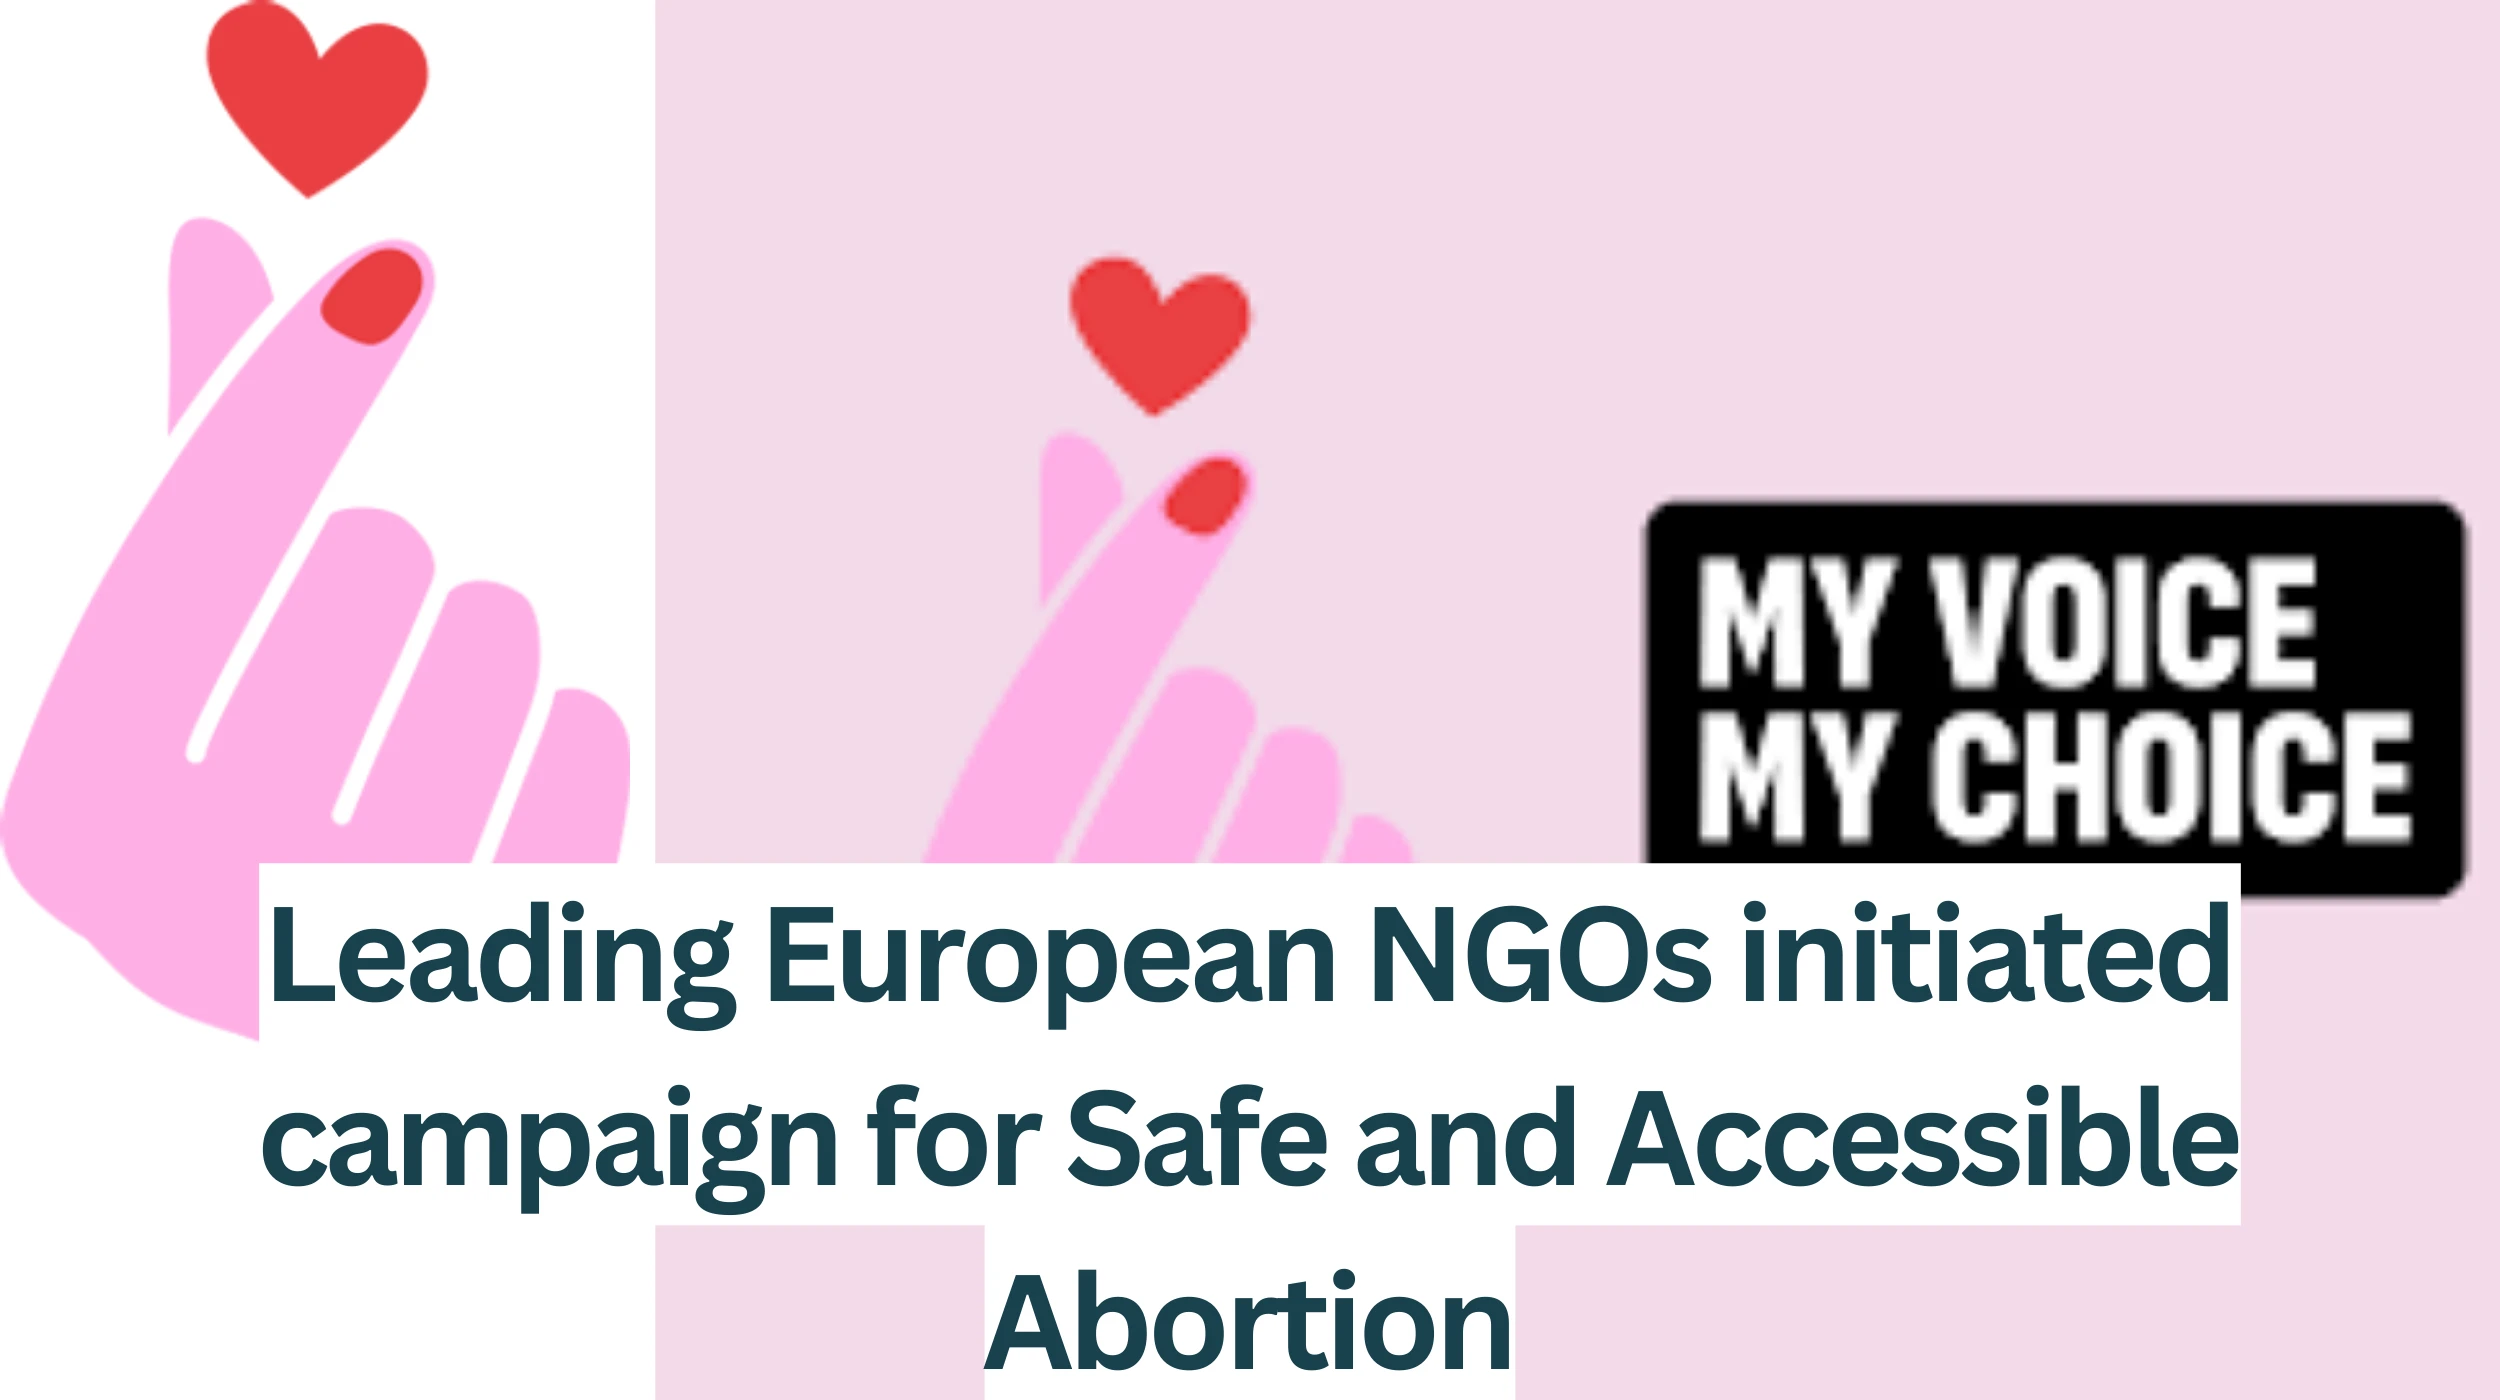 European-NGOs-initiated-campaign-for-Safe-Abortion